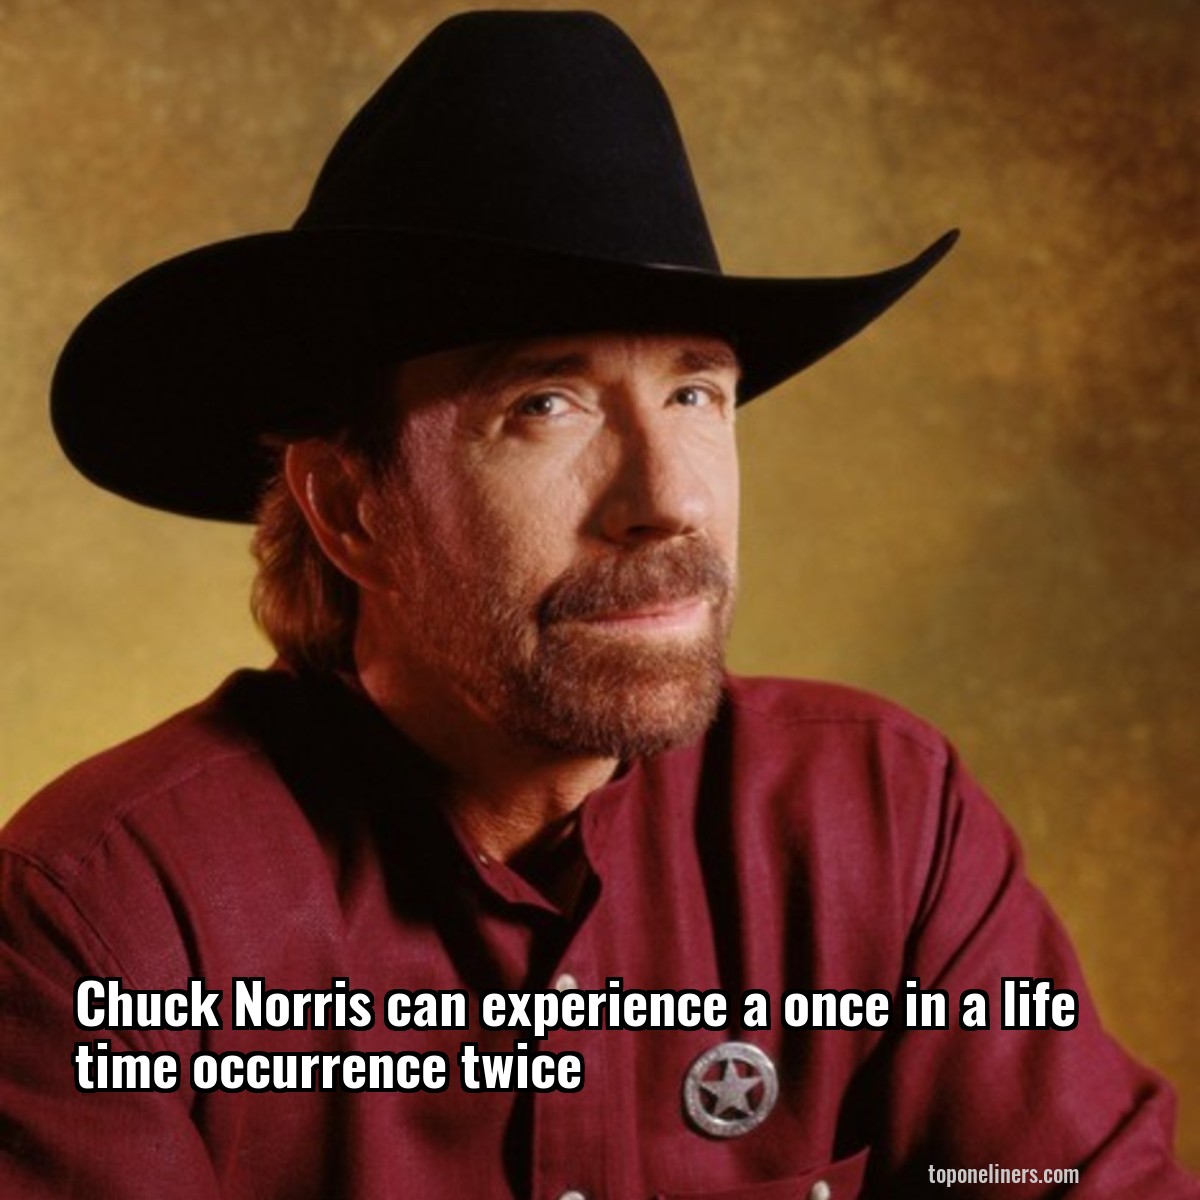 Chuck Norris can experience a once in a life time occurrence twice